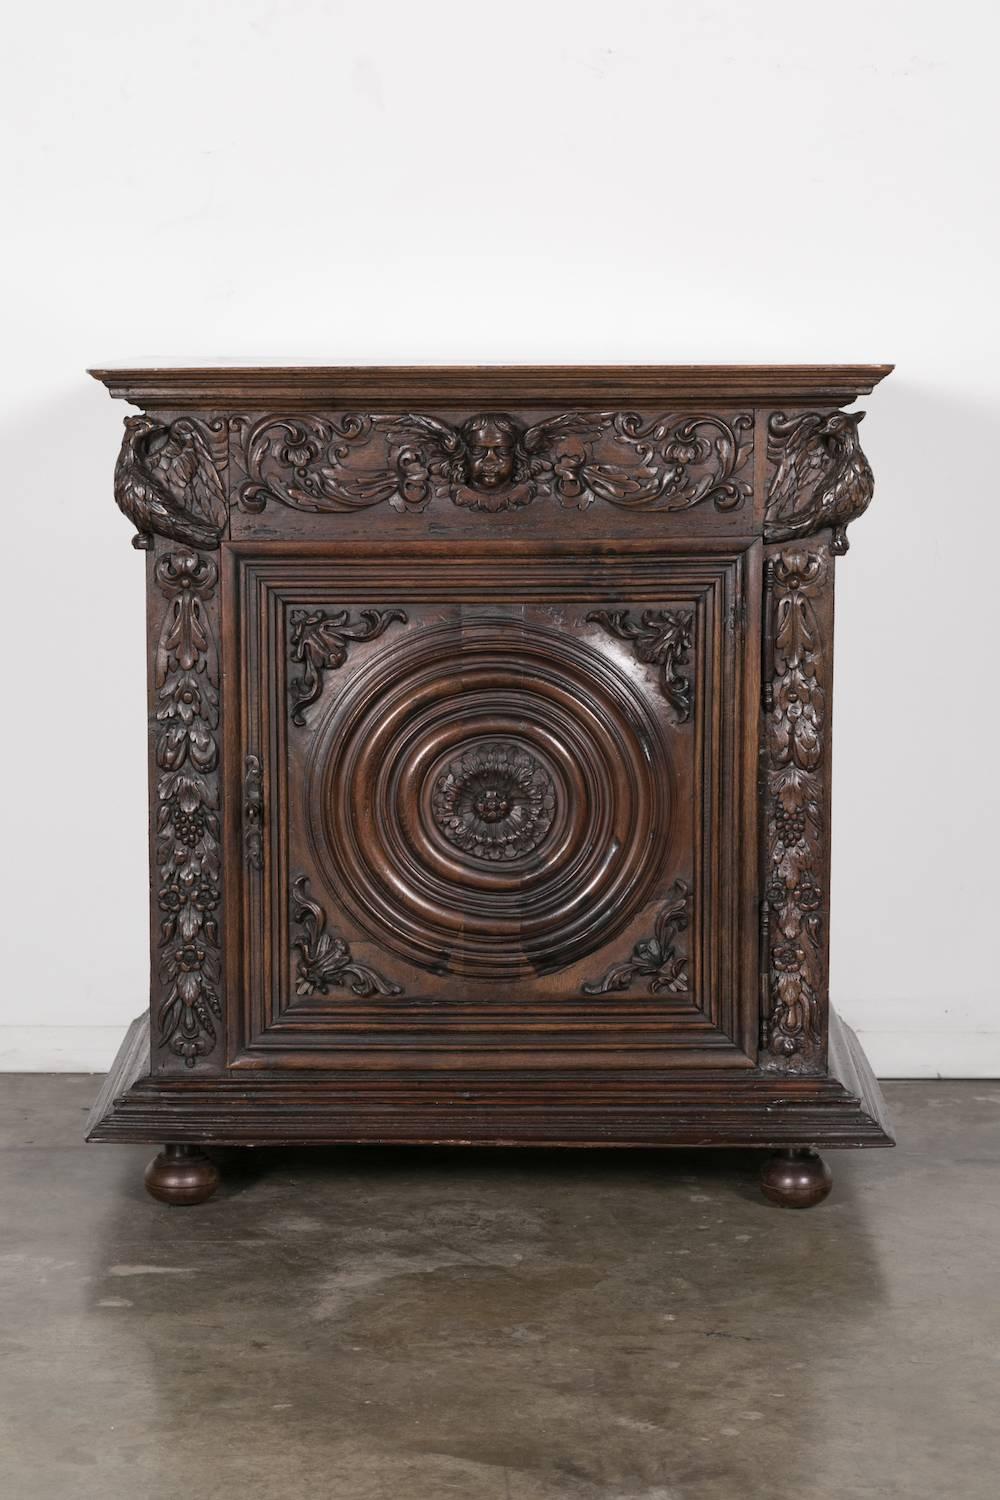 A very impressive Louis XIII style confiturier or jam cabinet handcrafted of solid walnut by talented artisans near the Bordeaux region during the early 1700s. Obviously made to specific order, this richly carved cabinet has a rectangular top and